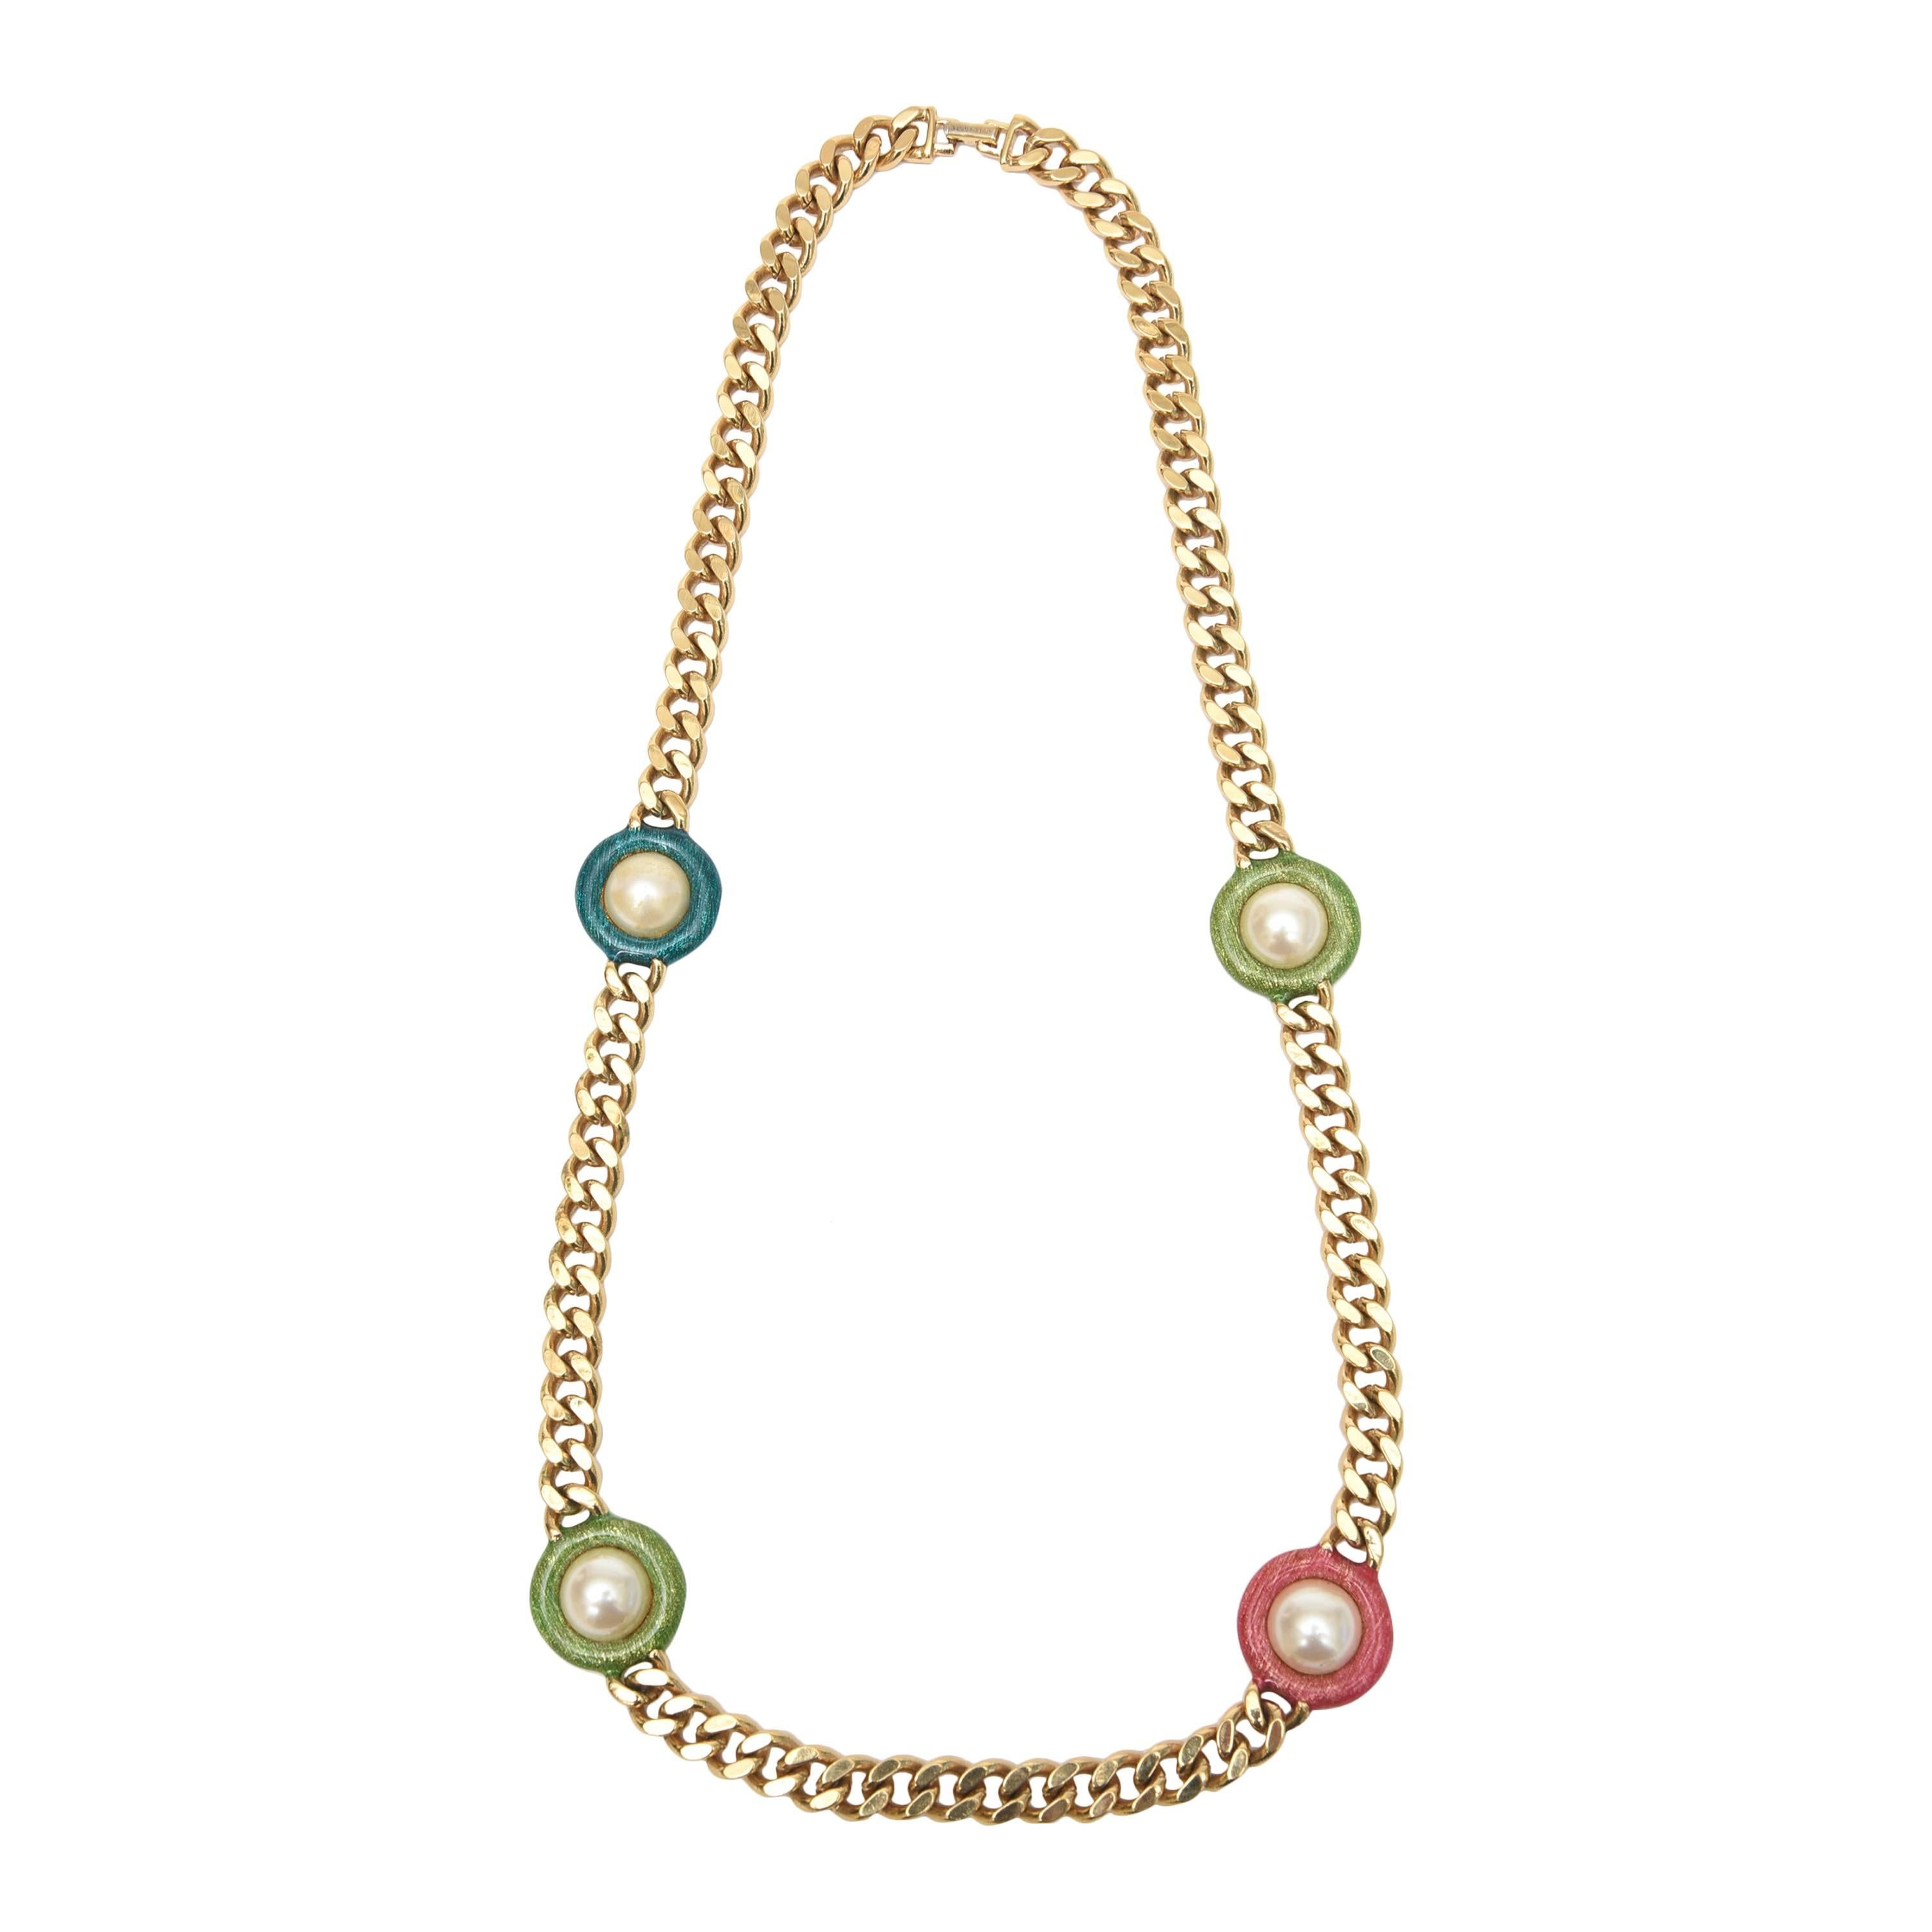 Guy Laroche Gold, Tone Chain Link Strand Necklace with Enamel and Faux Pearl SALE